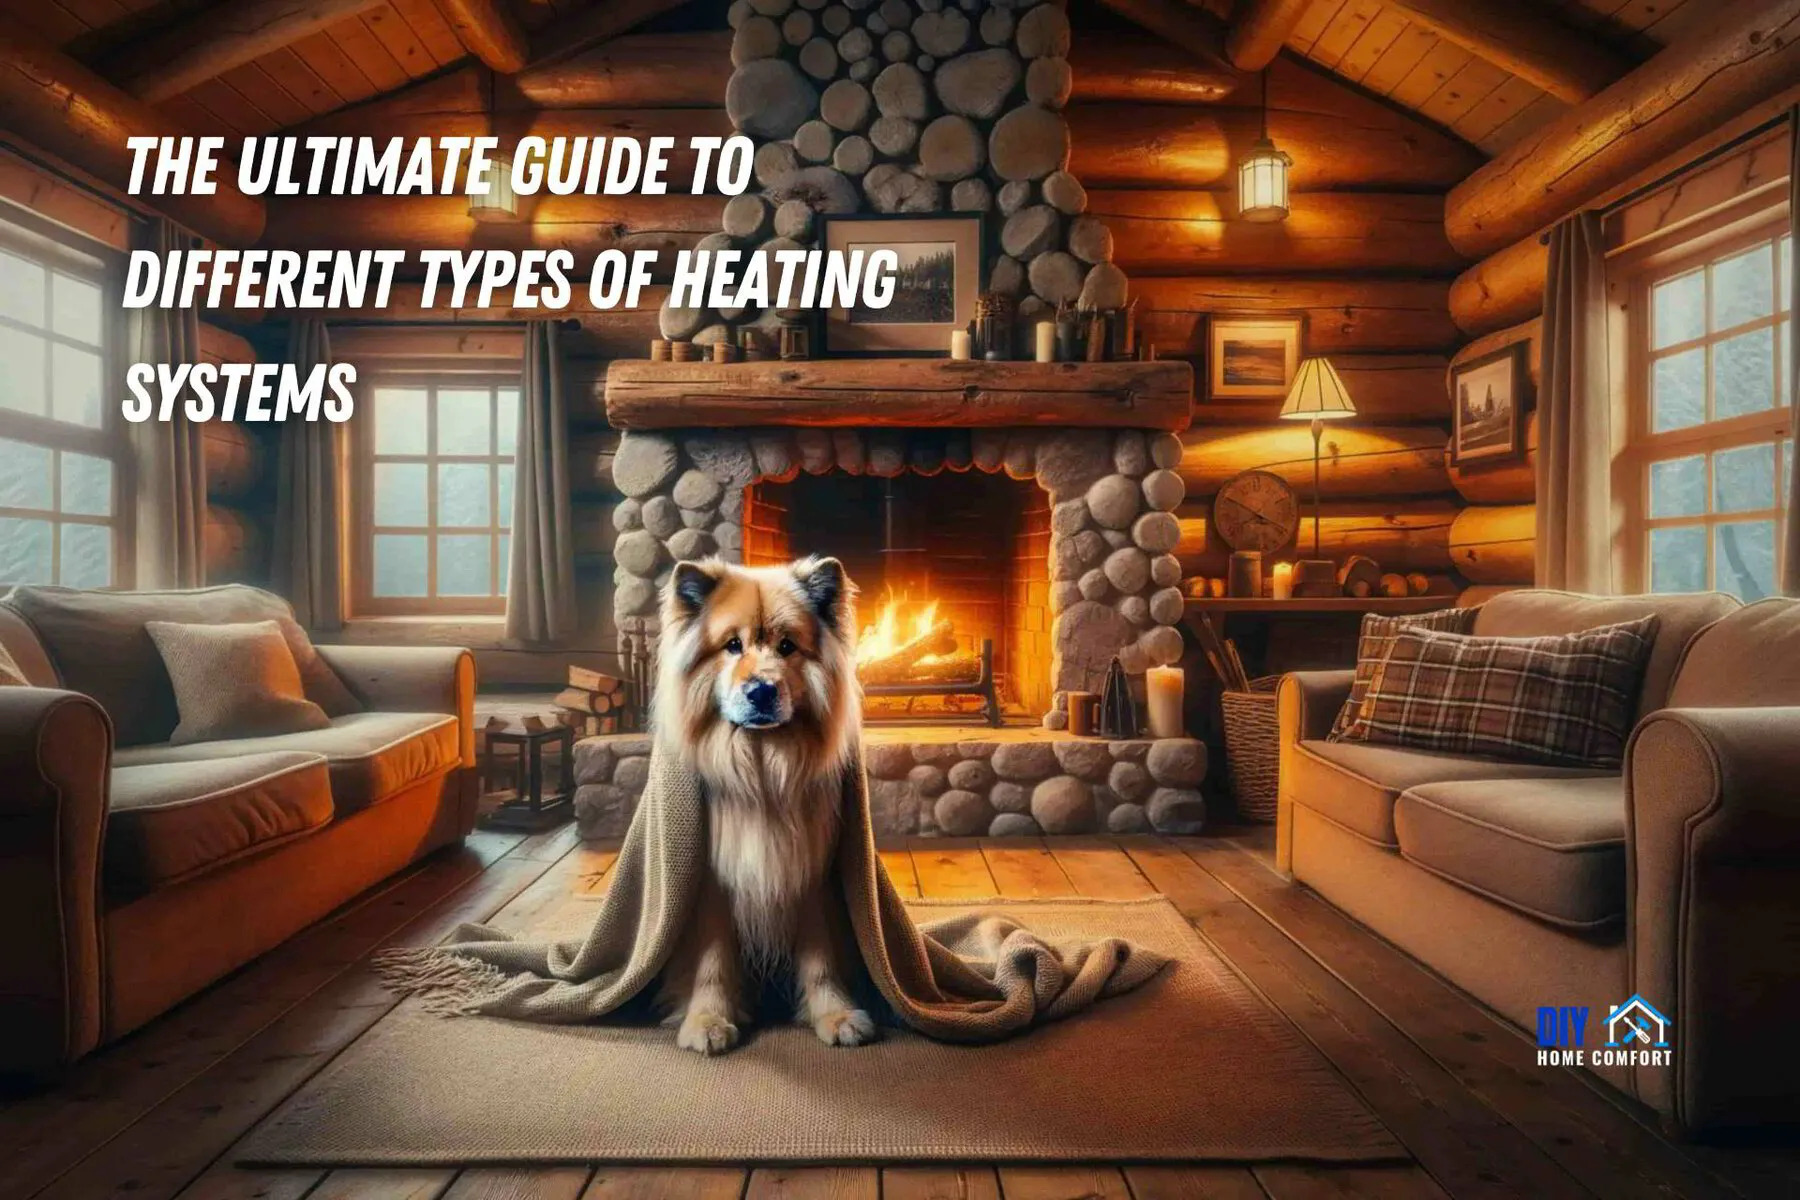 The Ultimate Guide to Different Types of Heating Systems | DIY Home Comfort